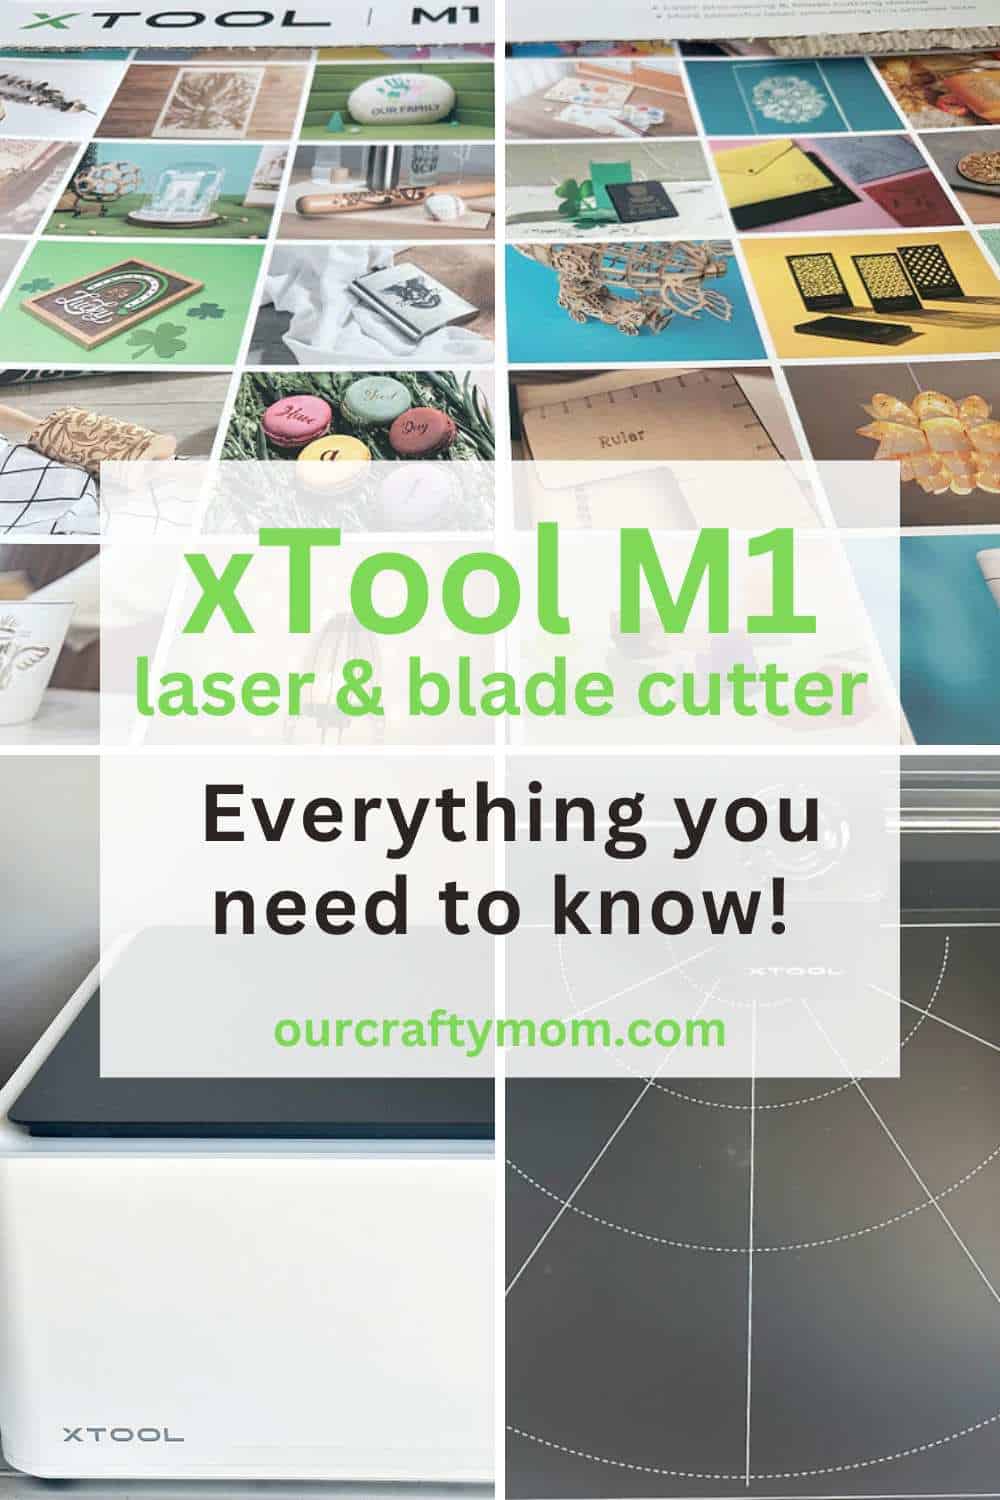 pin collage xtool m1 review